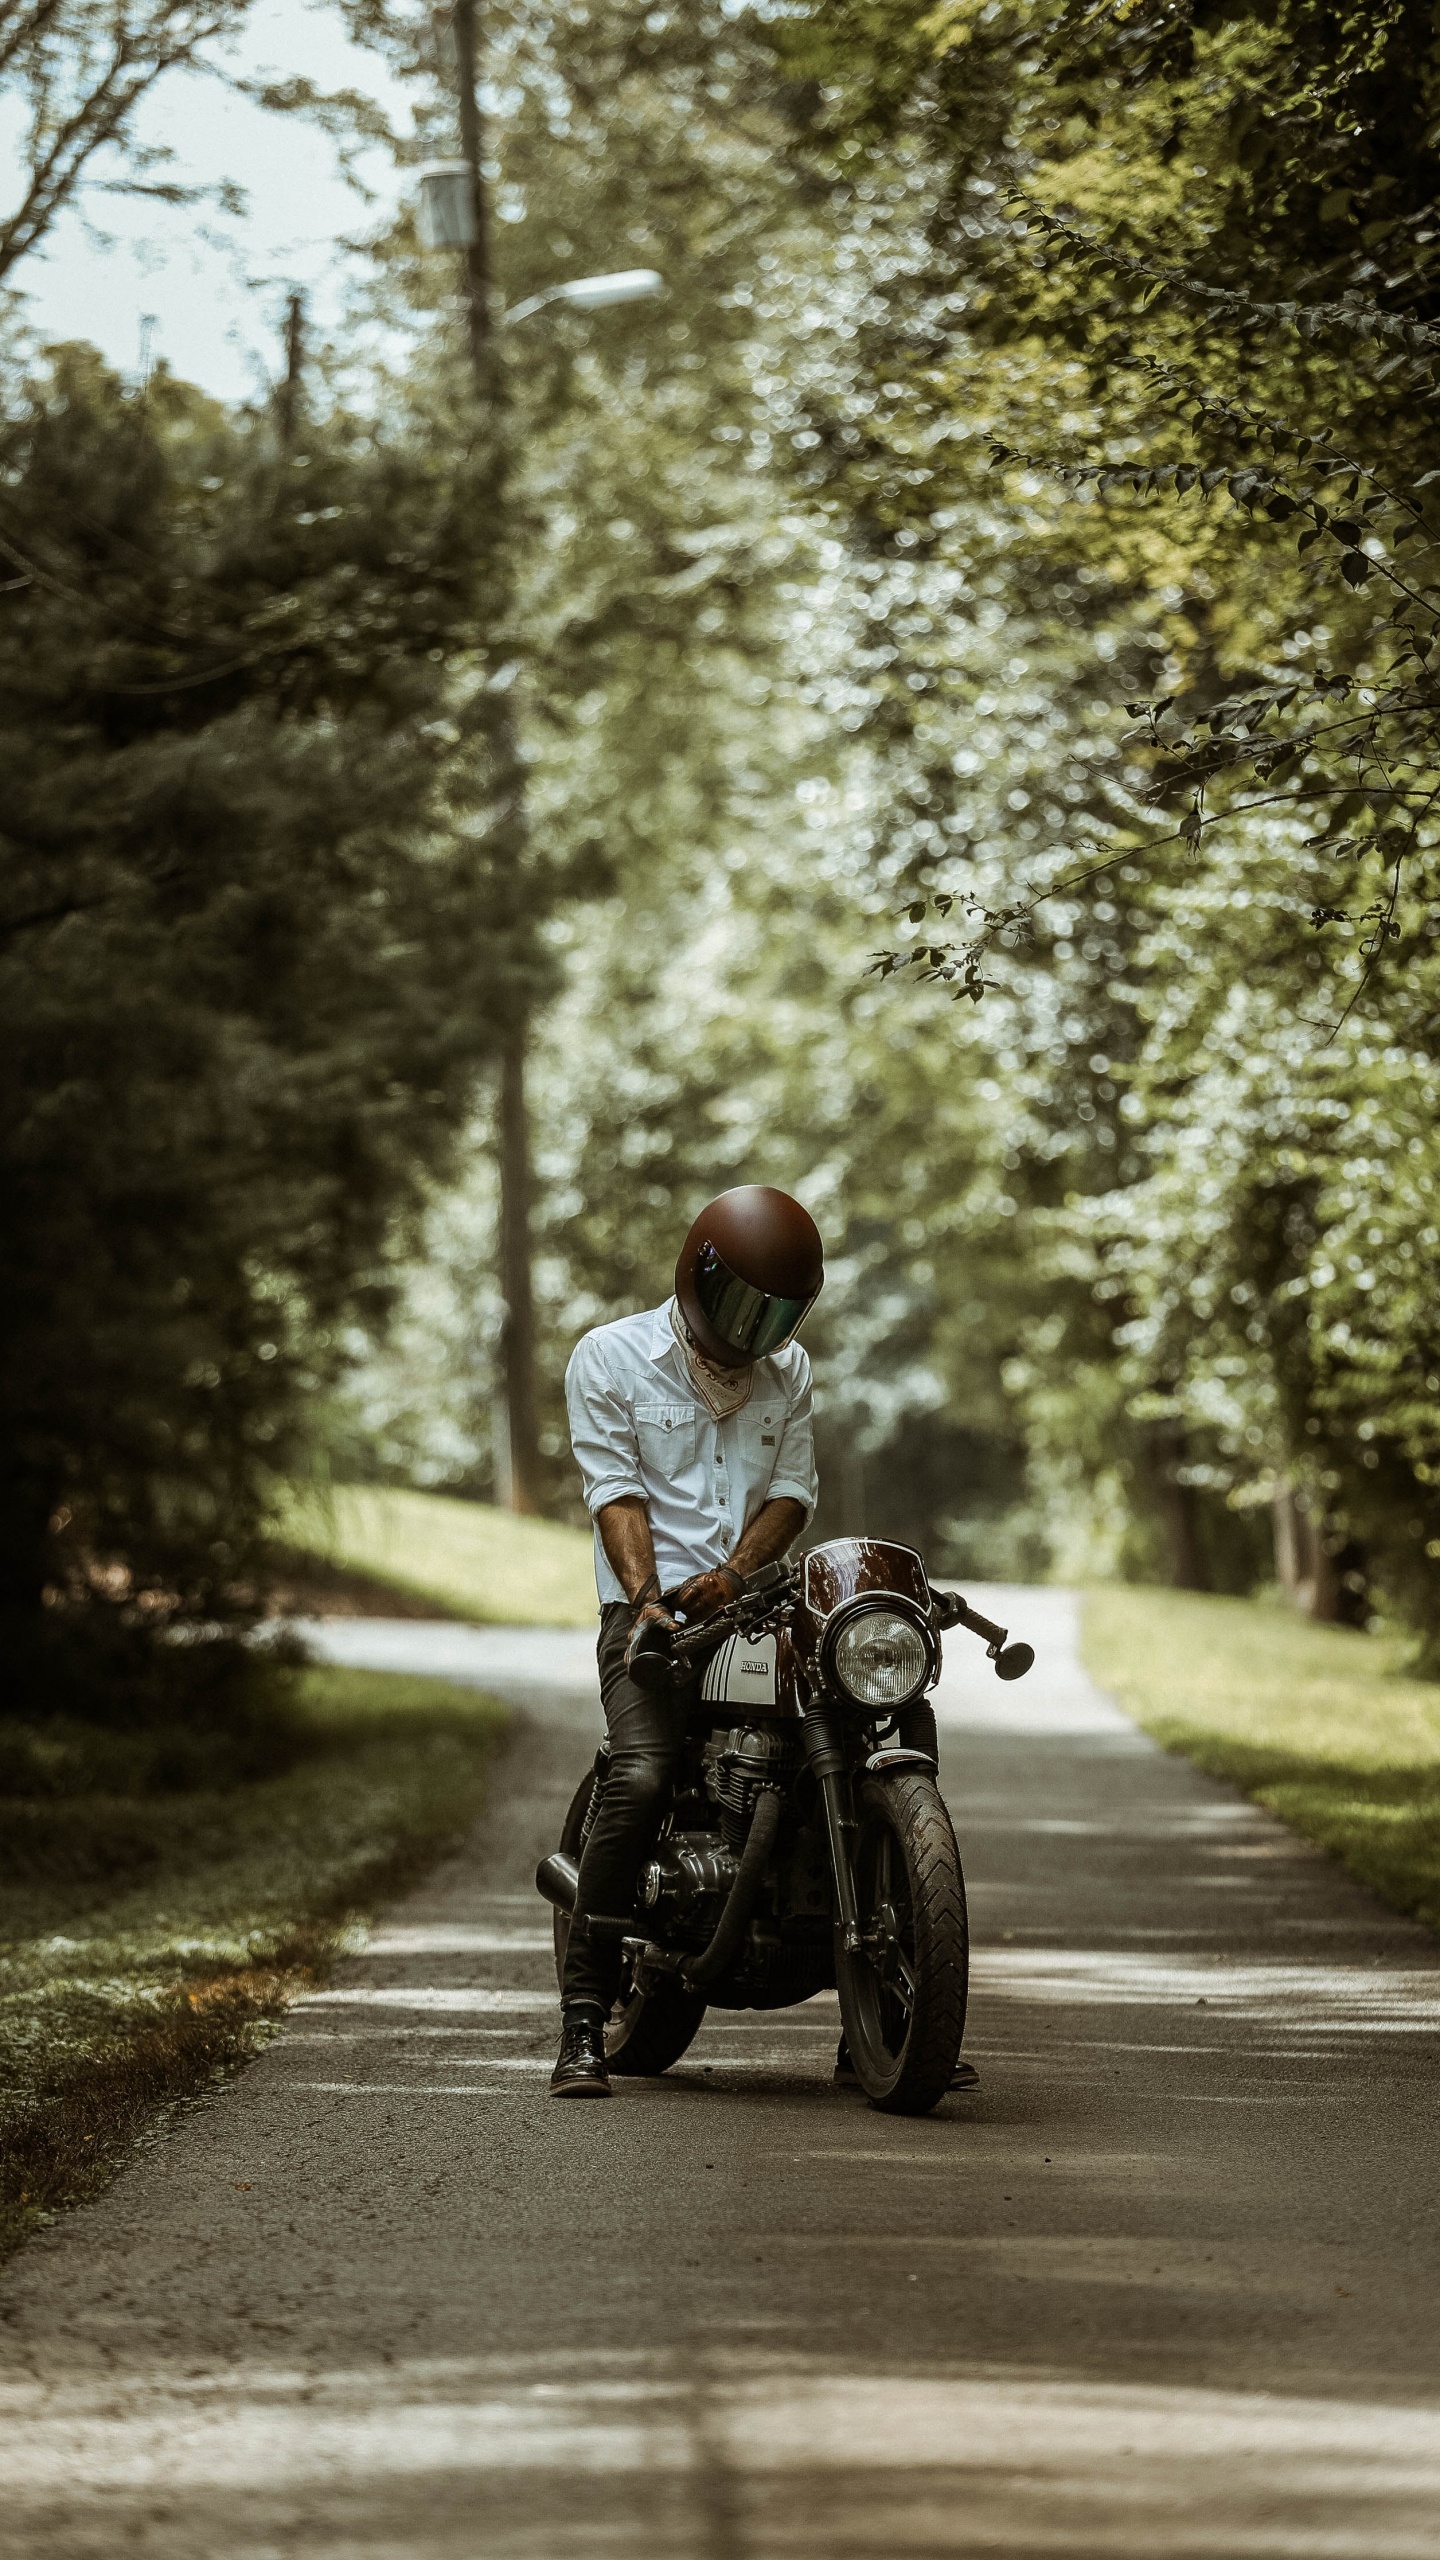 Man in White Shirt Riding Motorcycle on Road During Daytime. Wallpaper in 1440x2560 Resolution